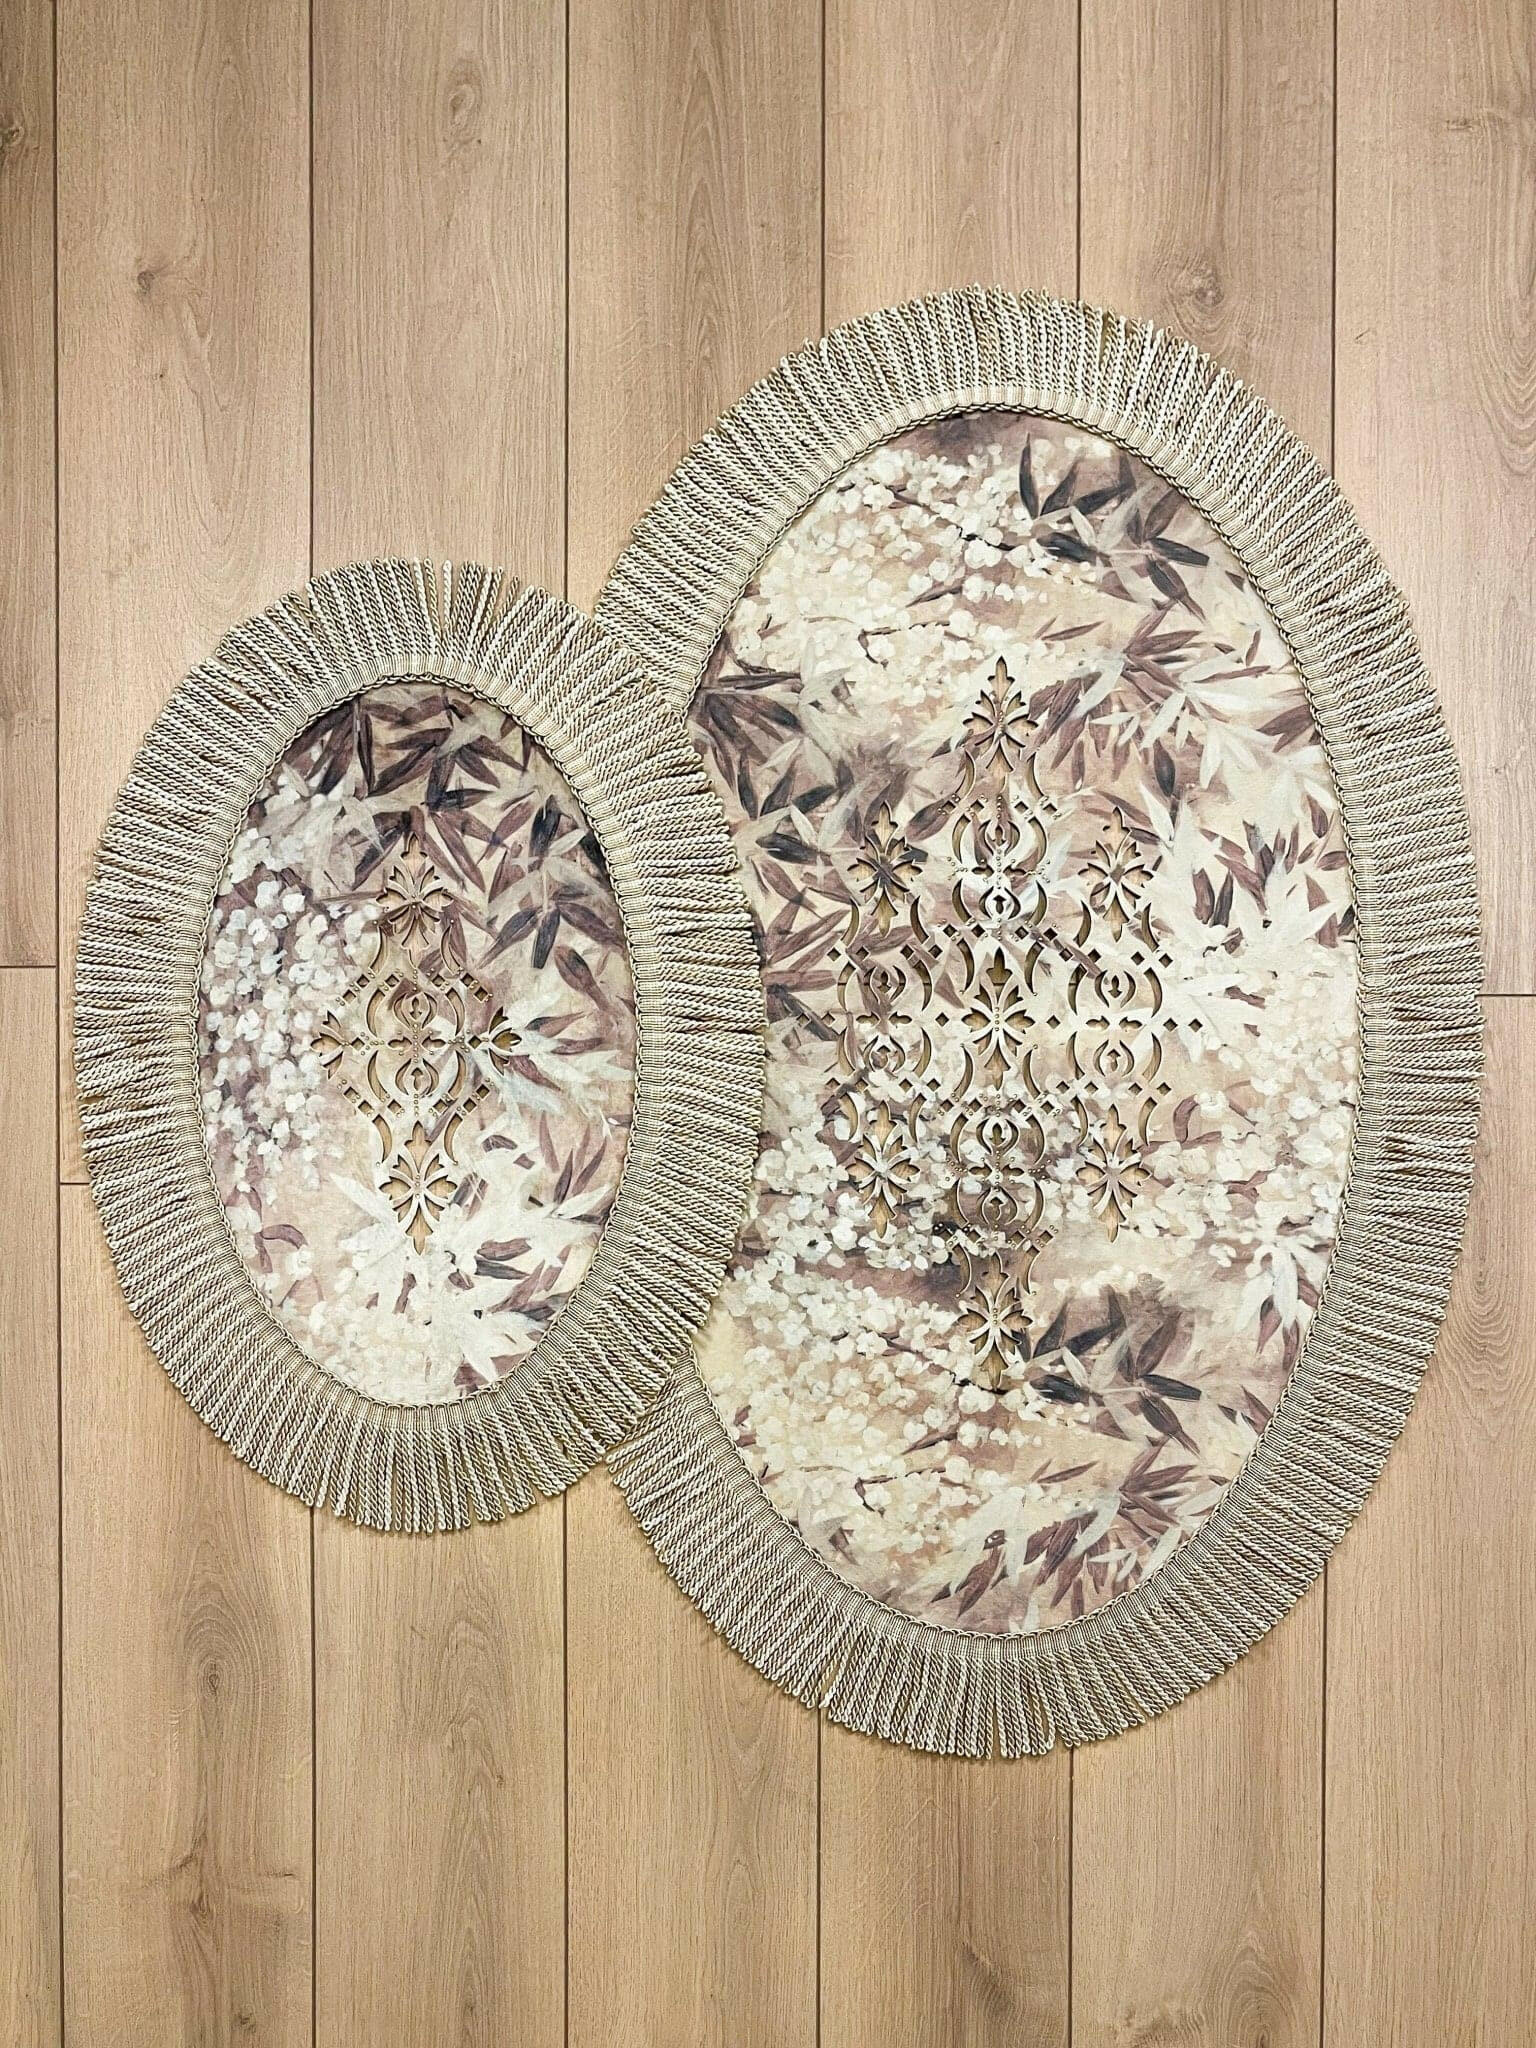 Palma Oval Coffee Brown Velvet Bathroom & Area Lounge Rug, Cut Through Floral Inspired Carpet with Tassels, Turkish Non-Slip Handmade Mat by Creative Home,RUG-PALMA-Bro-4060,RUG-PALMA-Bro-60100,RUG-PALMA-Bro-70120,RUG-PALMA-Bro-90150,RUG-PALMA-Bro-121182,RUG-PALMA-Bro-152243